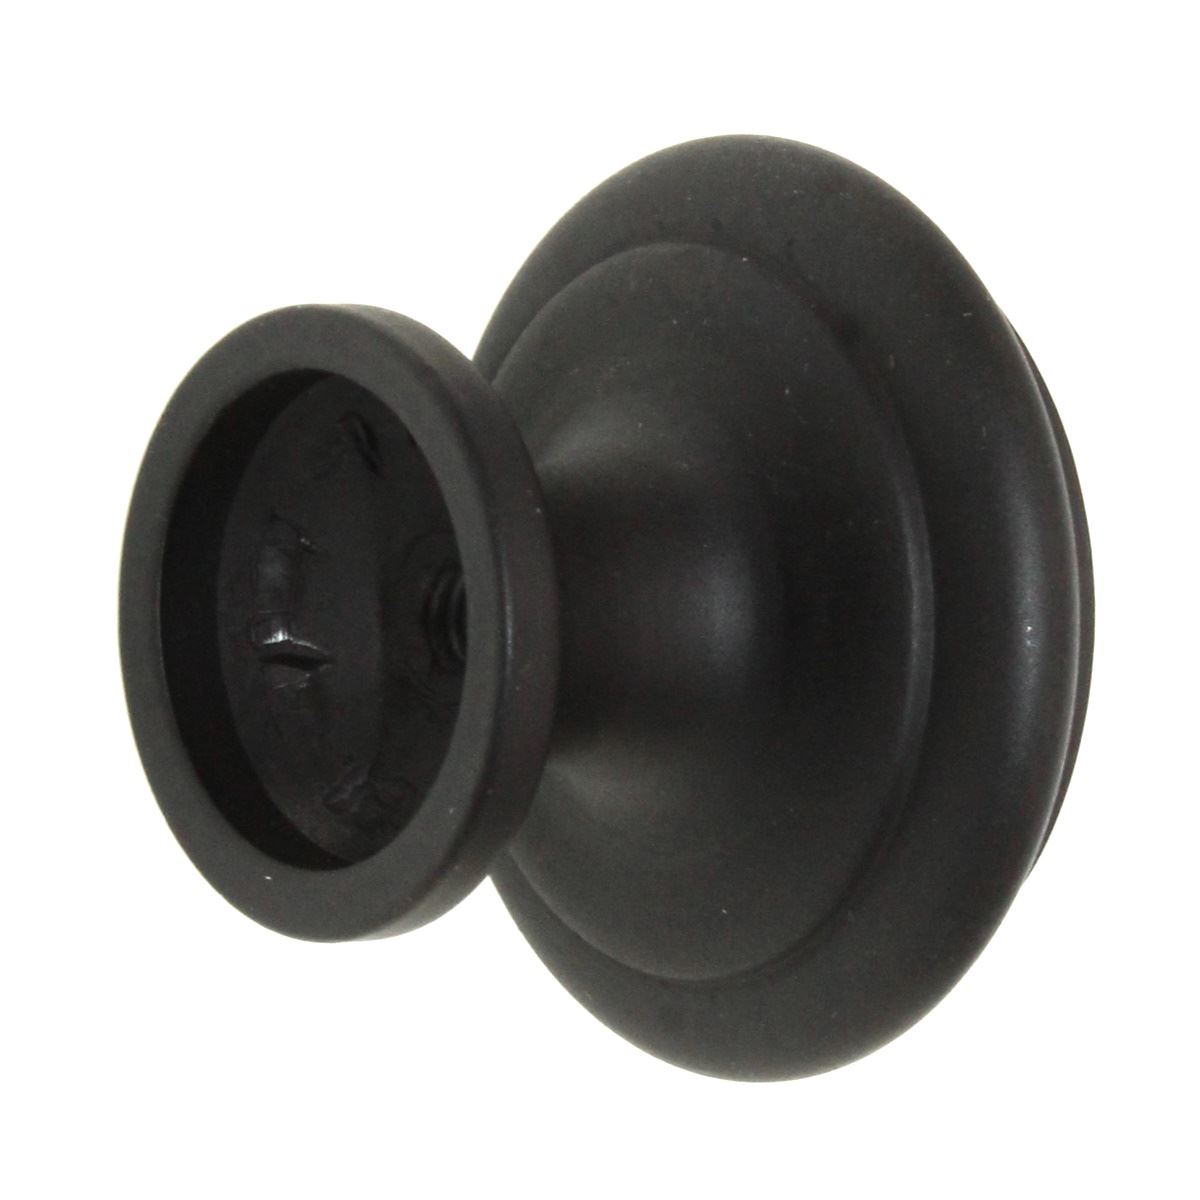 Hickory Hardware Cottage 1 1/2" Ringed Cabinet Knob Oil-Rubbed Bronze P3501-10B